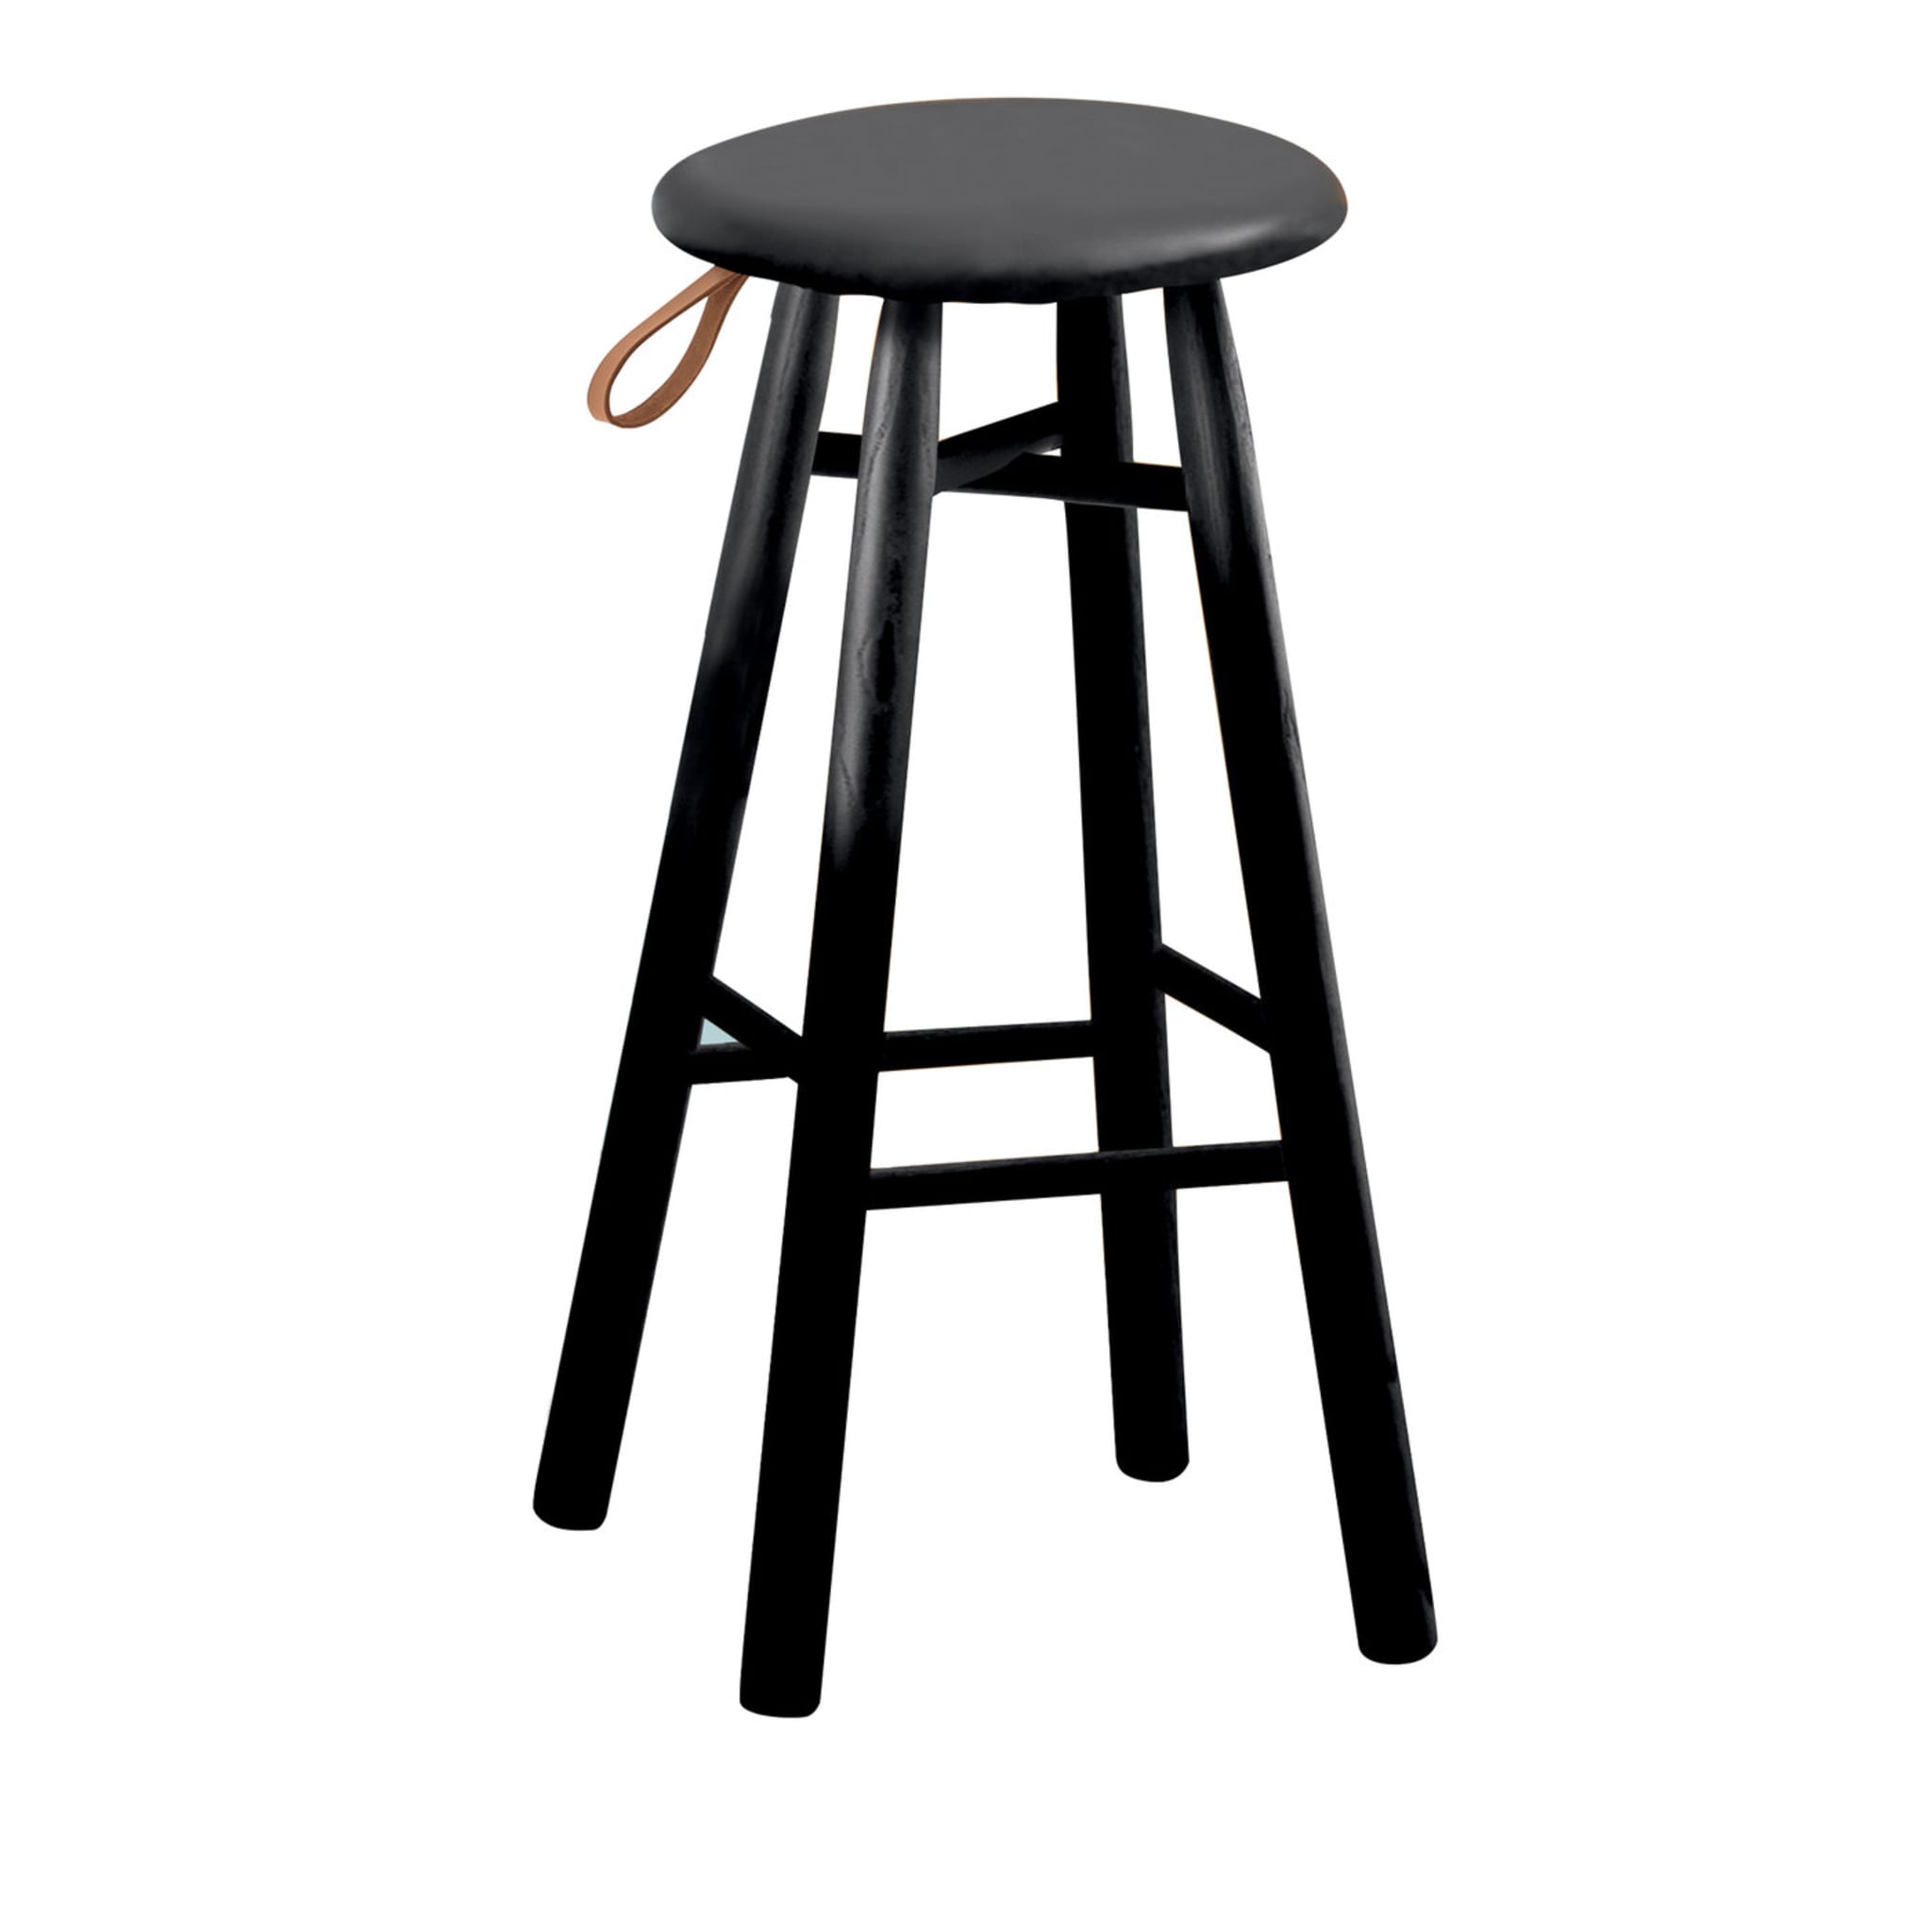 Tag Black Leather High Stool - Main view